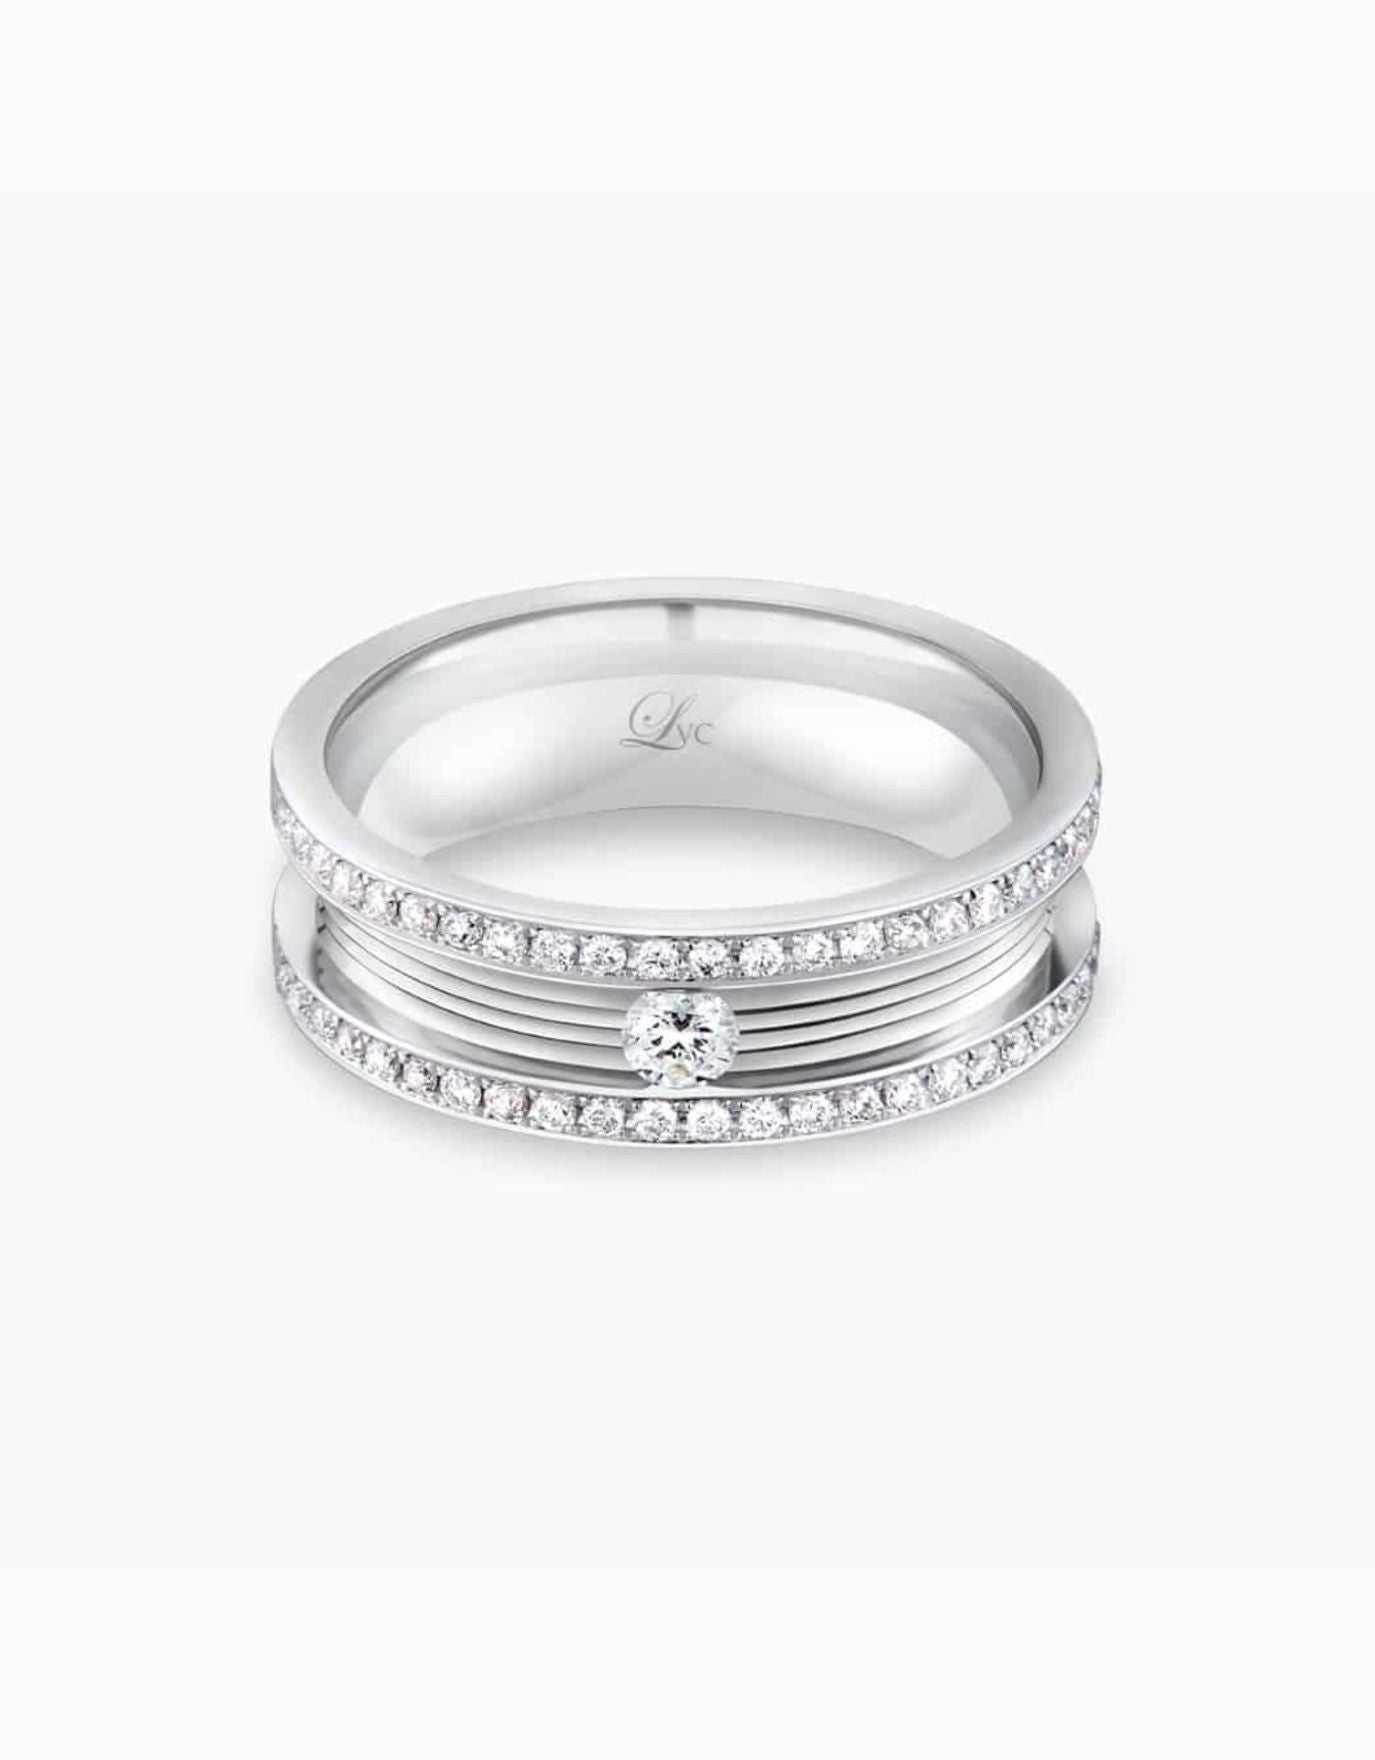 LVC Promise Eternity Wedding Band with a Center Solitaire Diamond